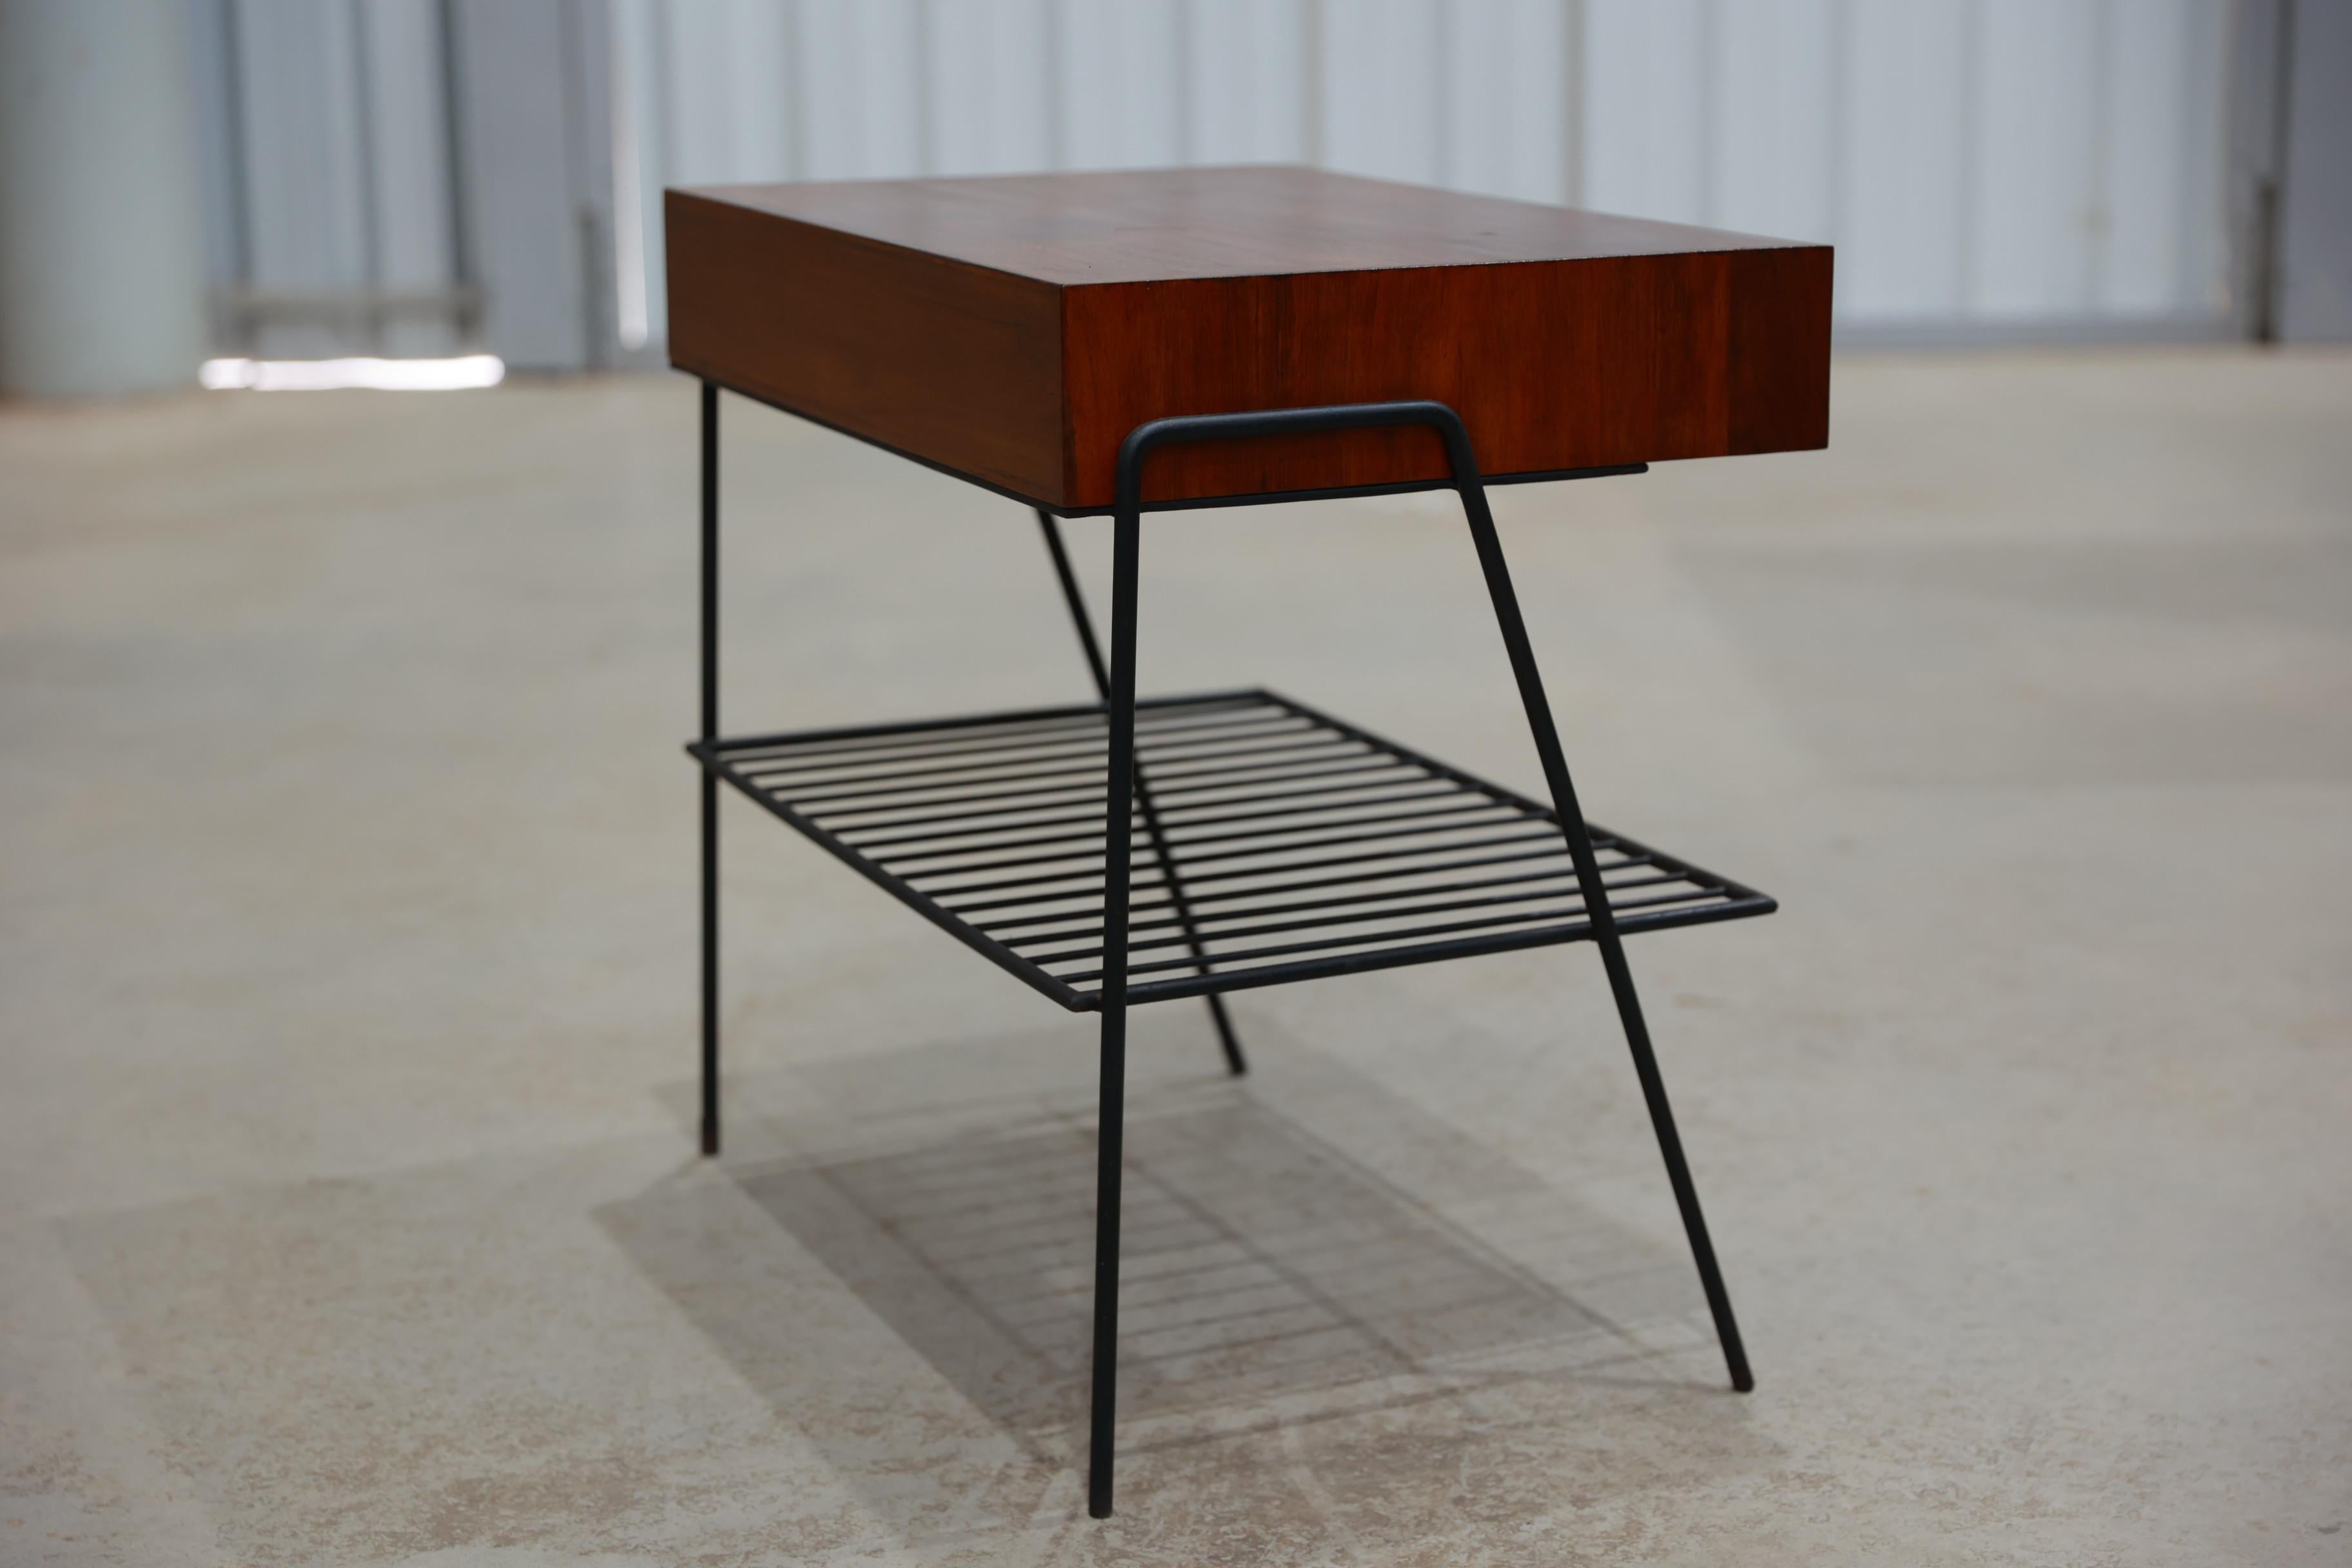 20th Century Brazilian Modern Side table in Hardwood and Metal, Unknown, c. 1950 For Sale